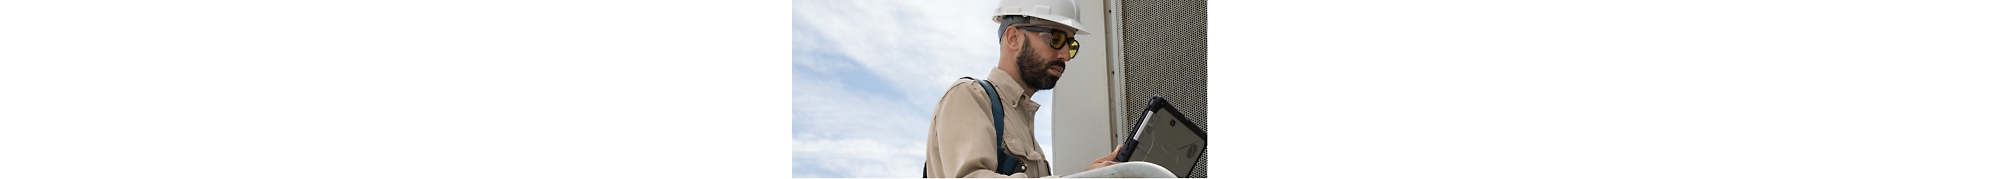 A man in a hard hat is using a laptop.